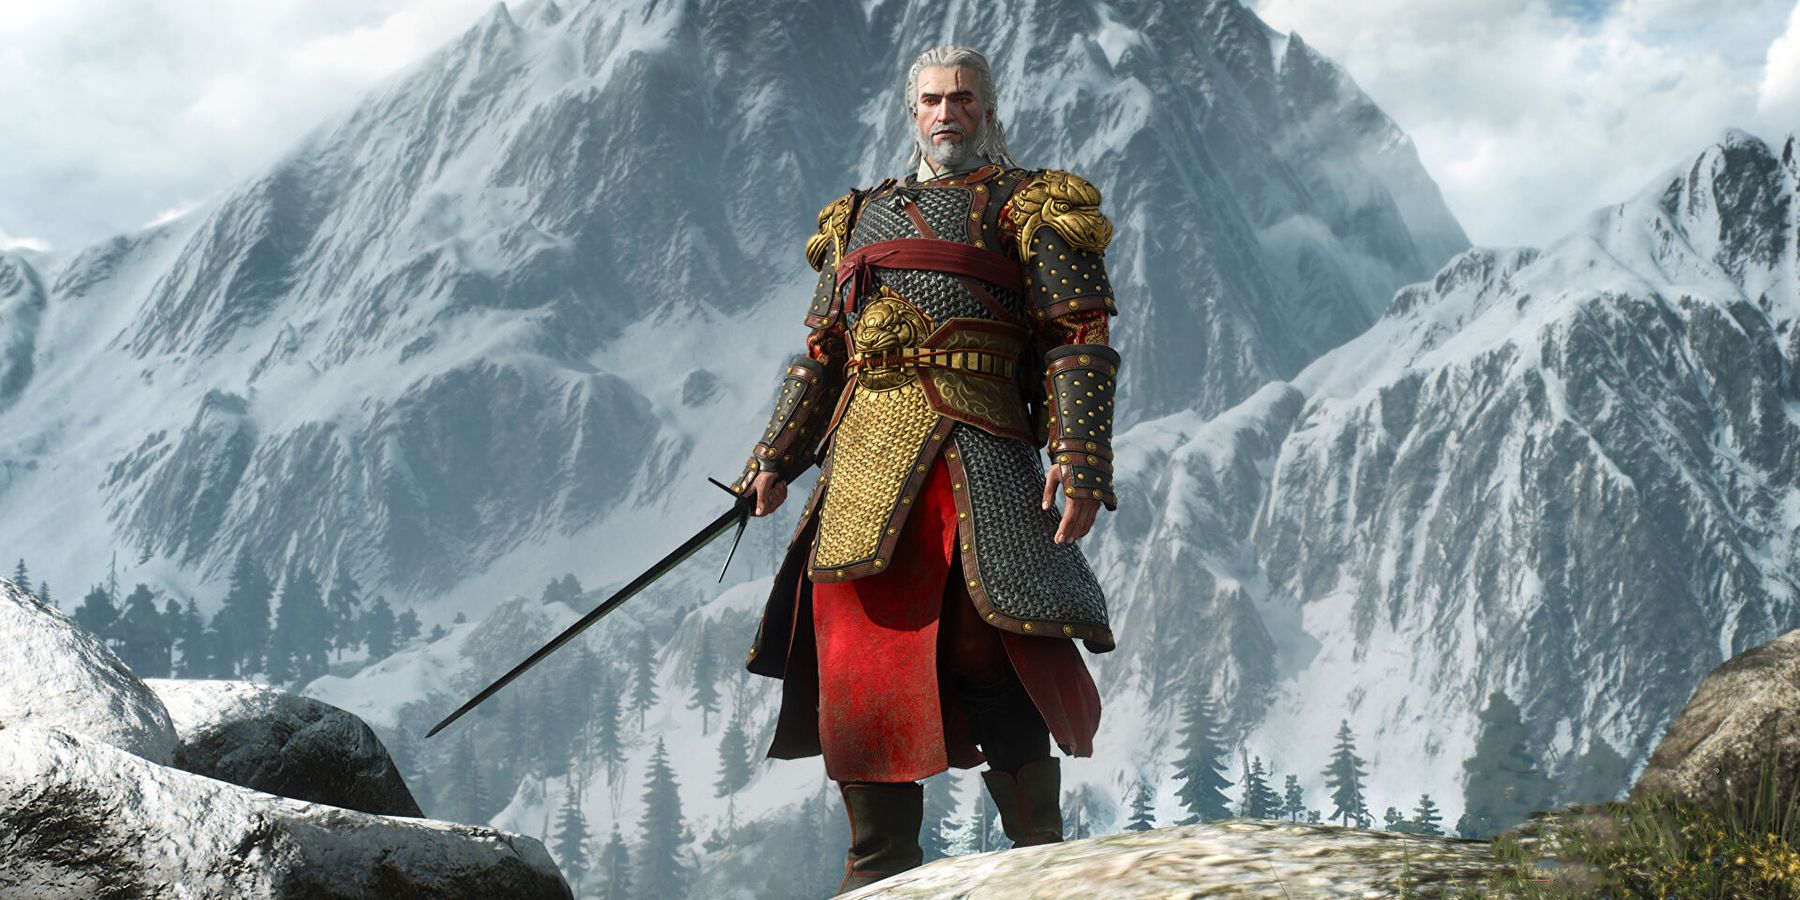 The Witcher 3 Next Gen Update Includes More Than Prettier Graphics